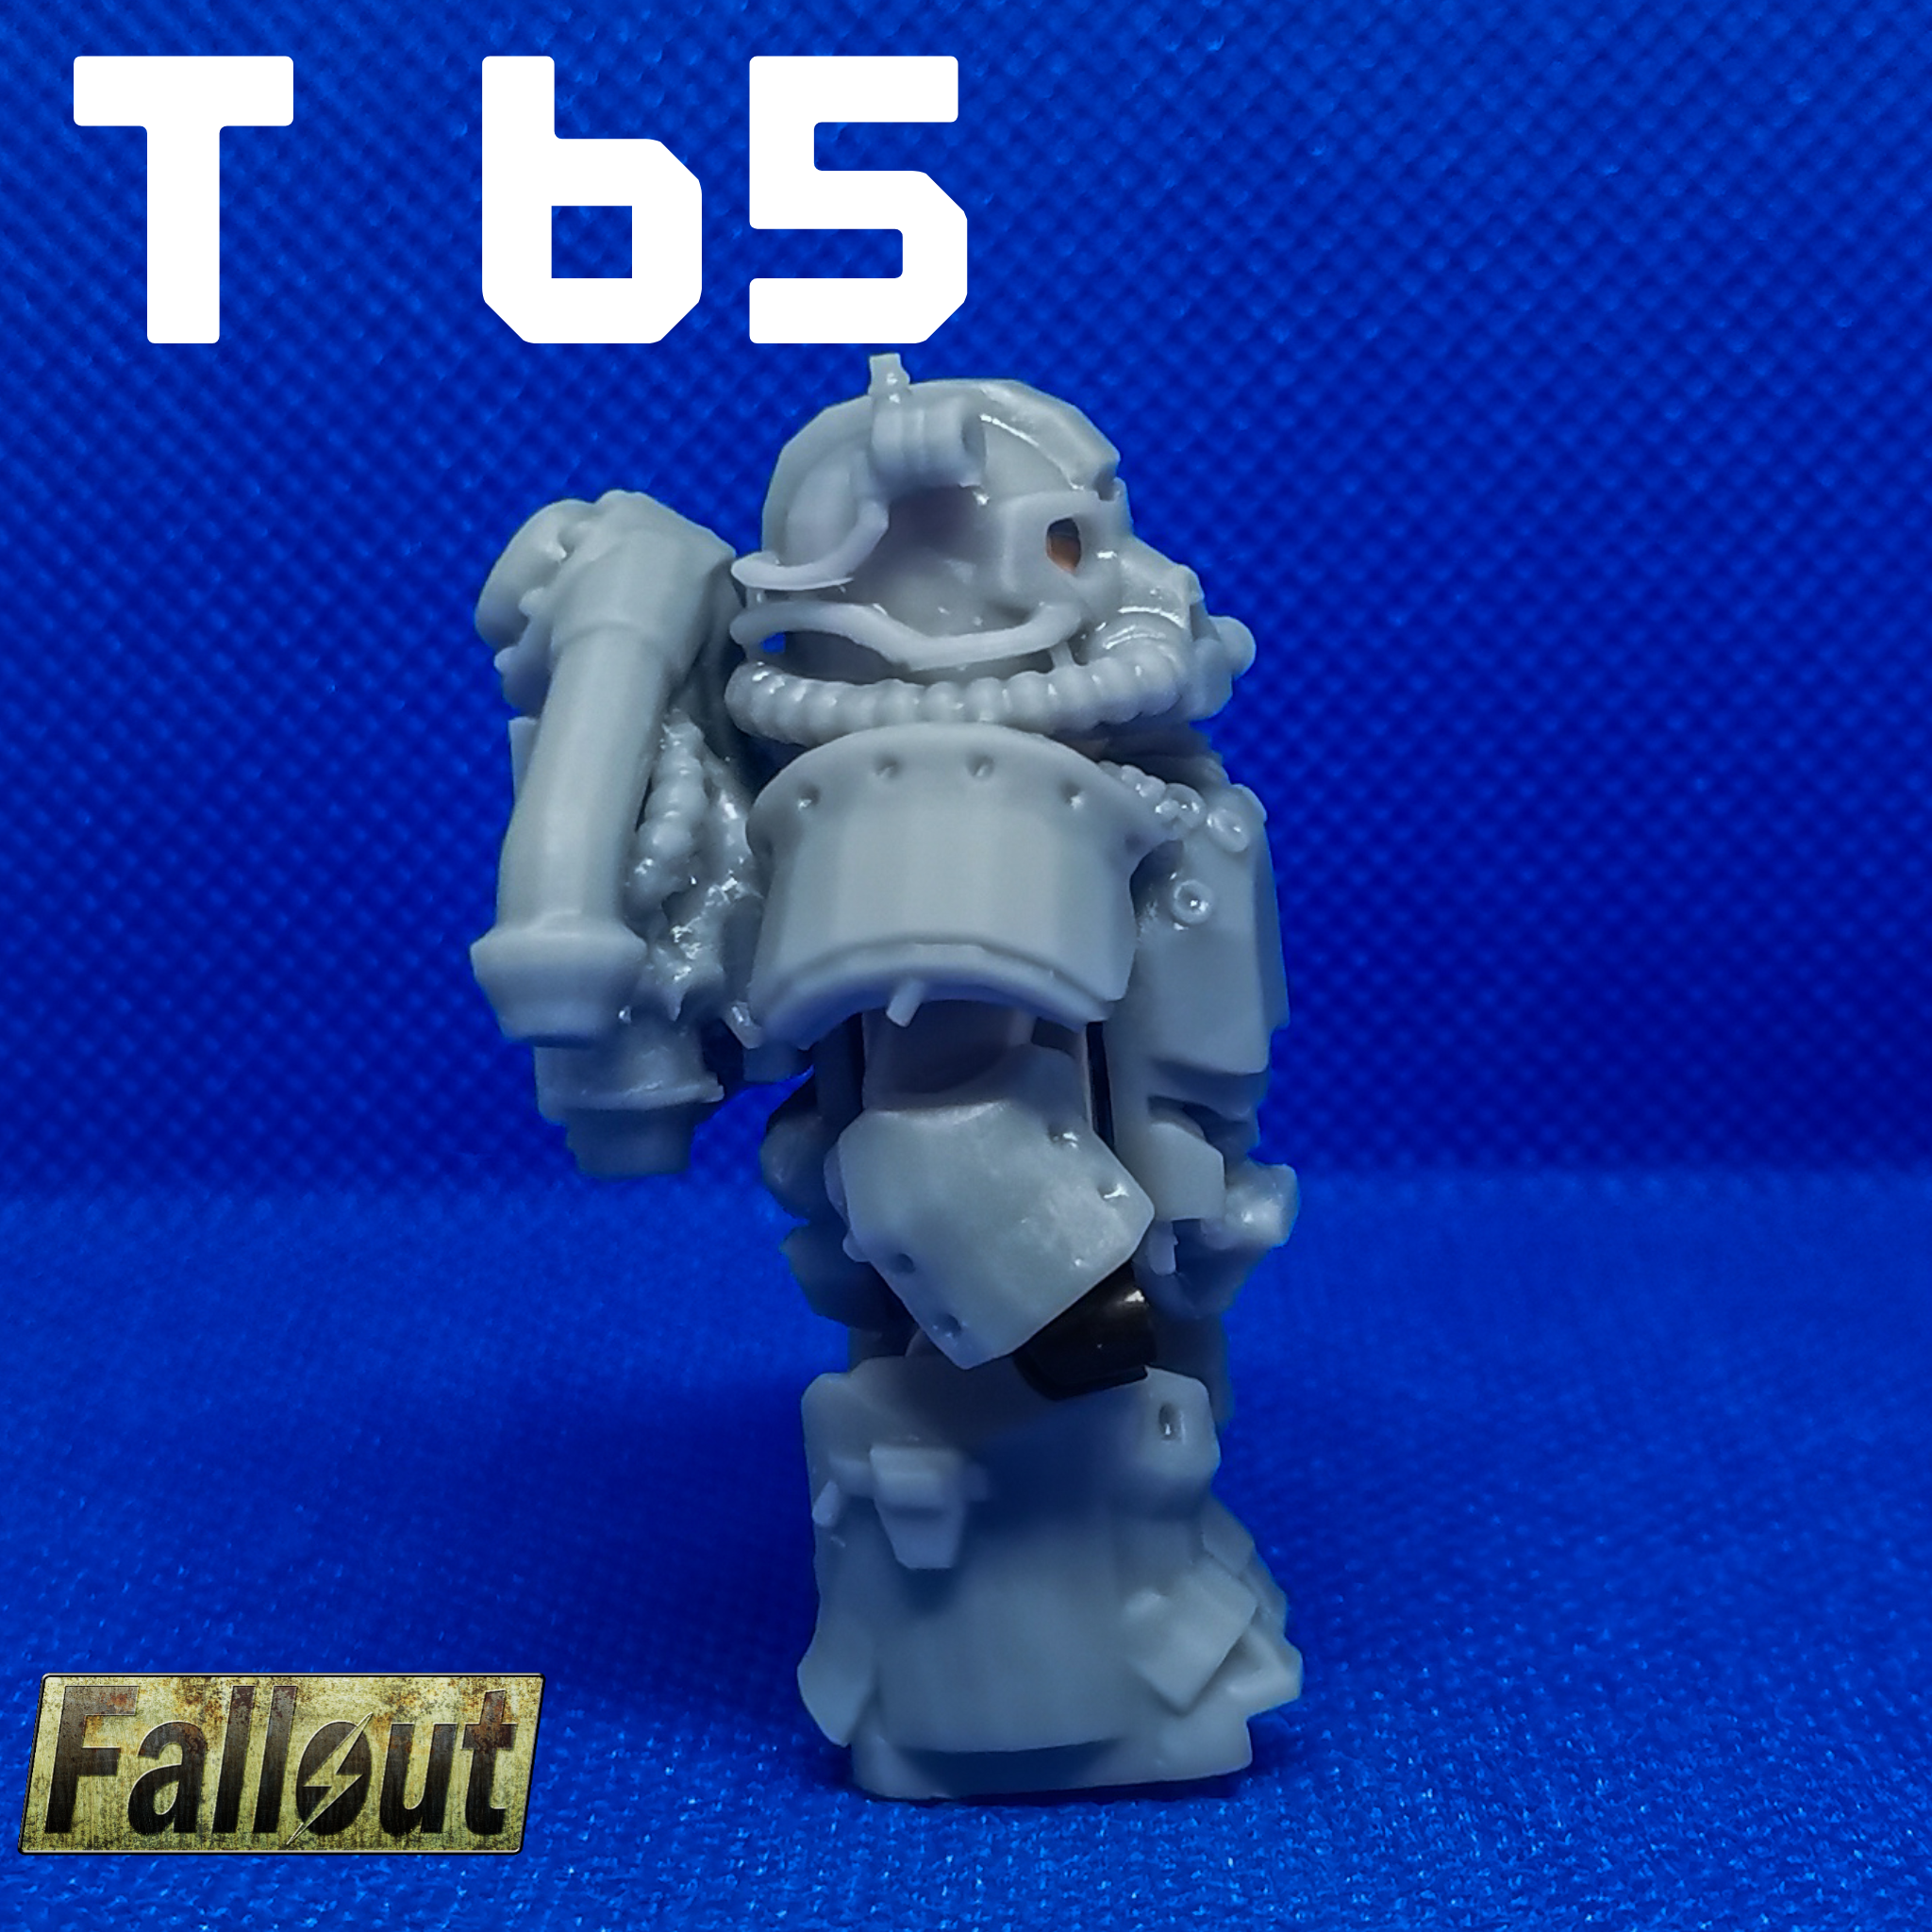 Lego Fallout Power Armor (Part 2) - My, Lego, Fallout, Power armor, Constructor, Games, Toys, Enclave, Longpost